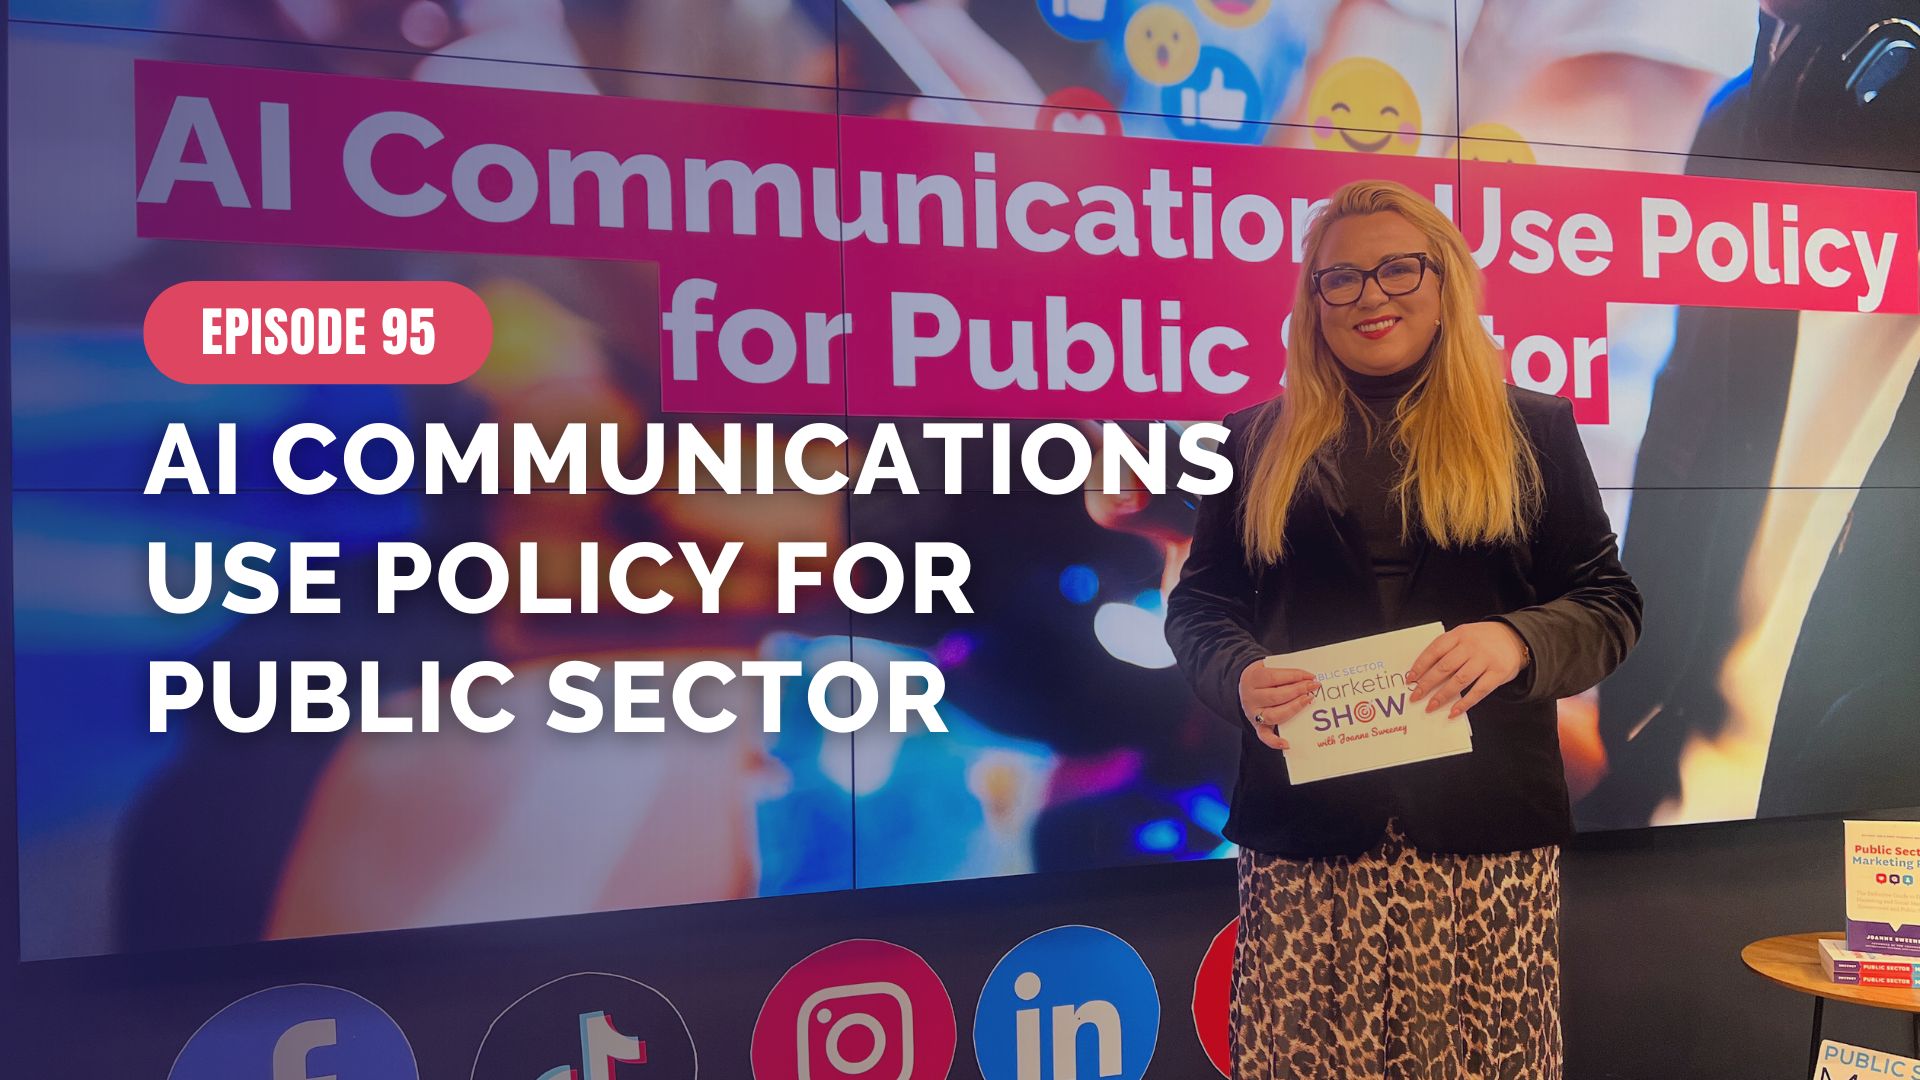 AI Communications Use Policy for Public Sector